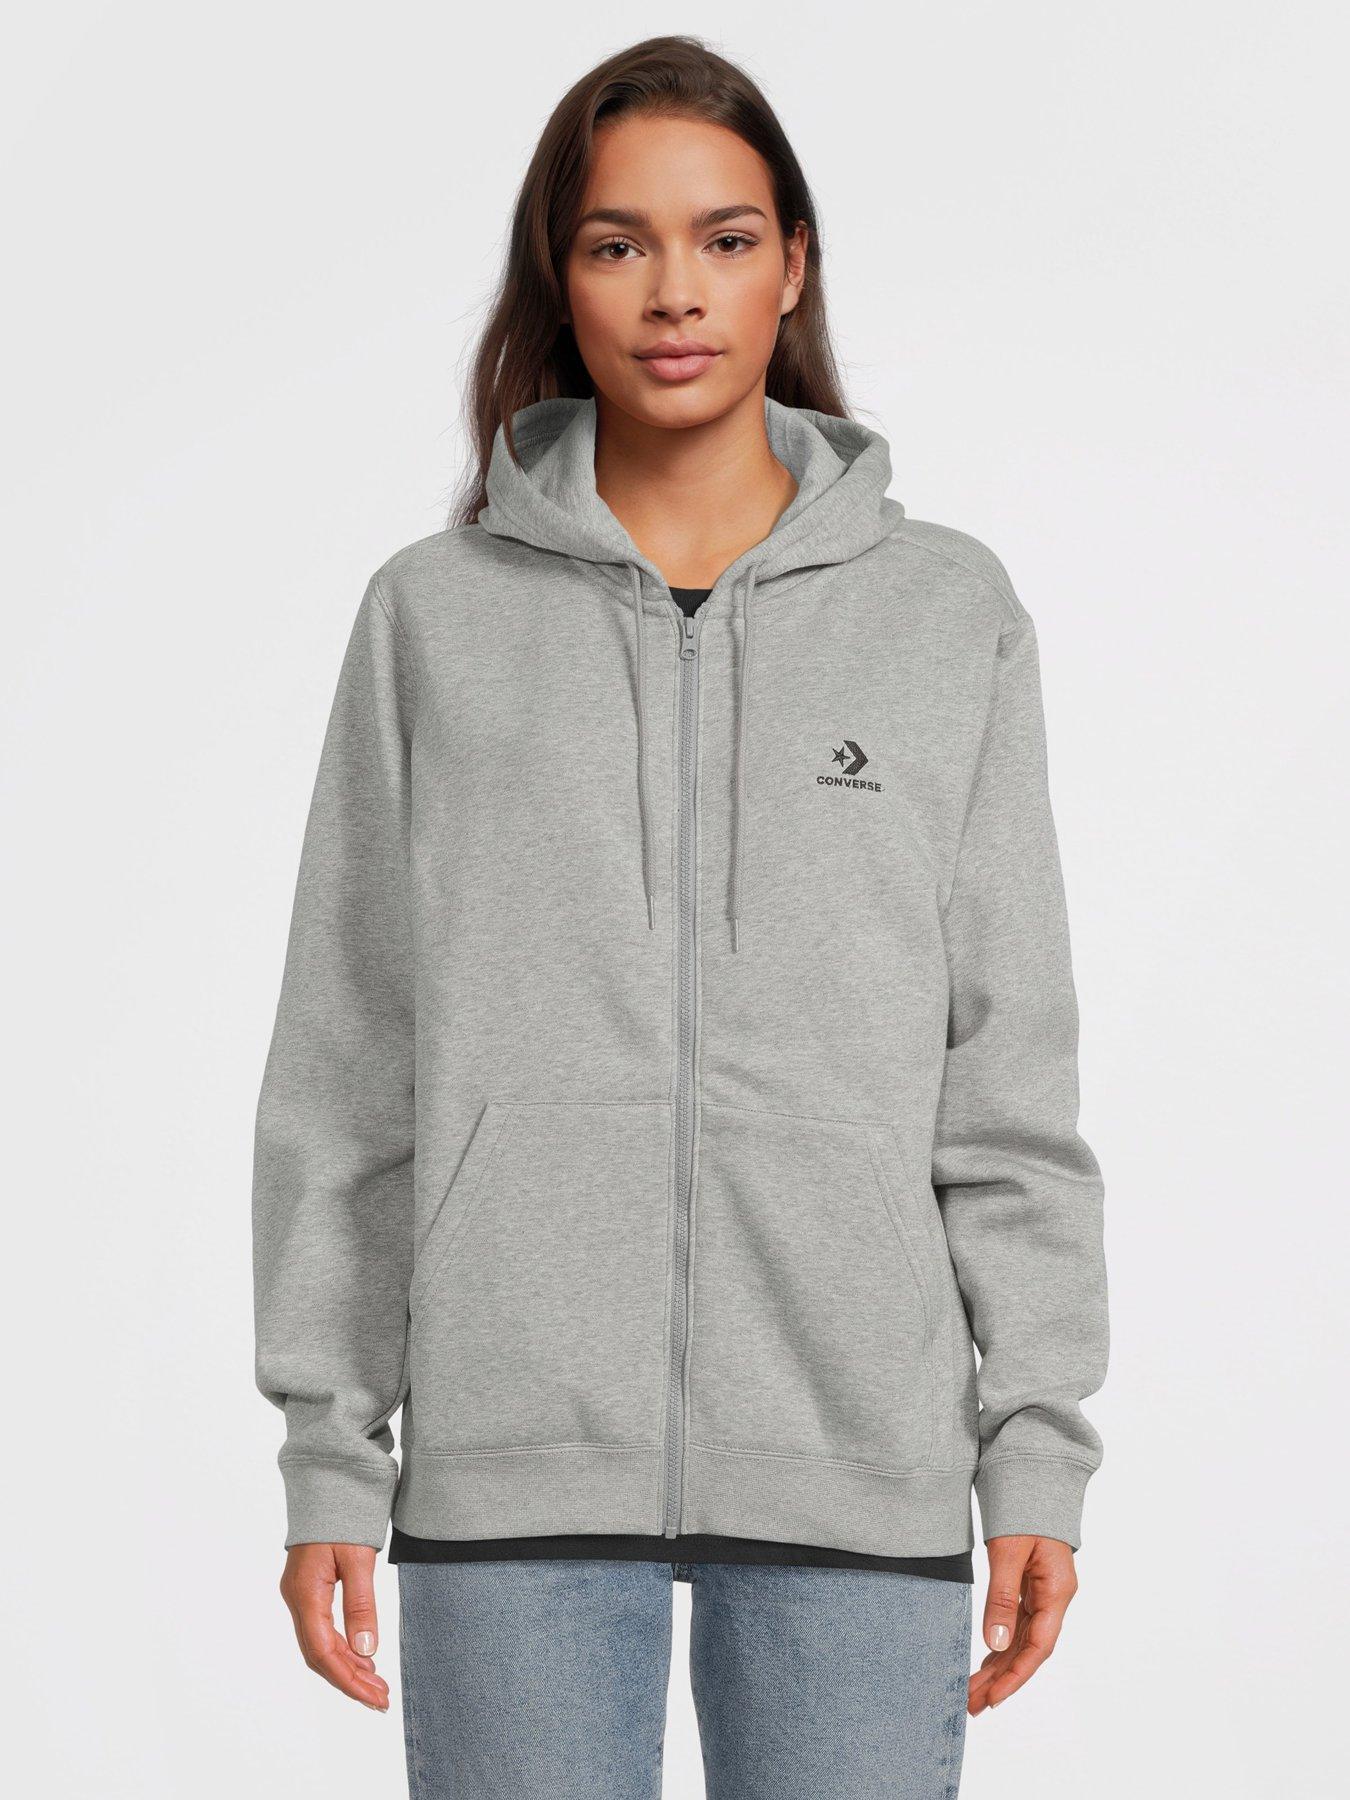 Chest Chevron for - Left Converse Star All Full Purchase Zip - in sales Embroidered Grey 2022 Hoodie people the